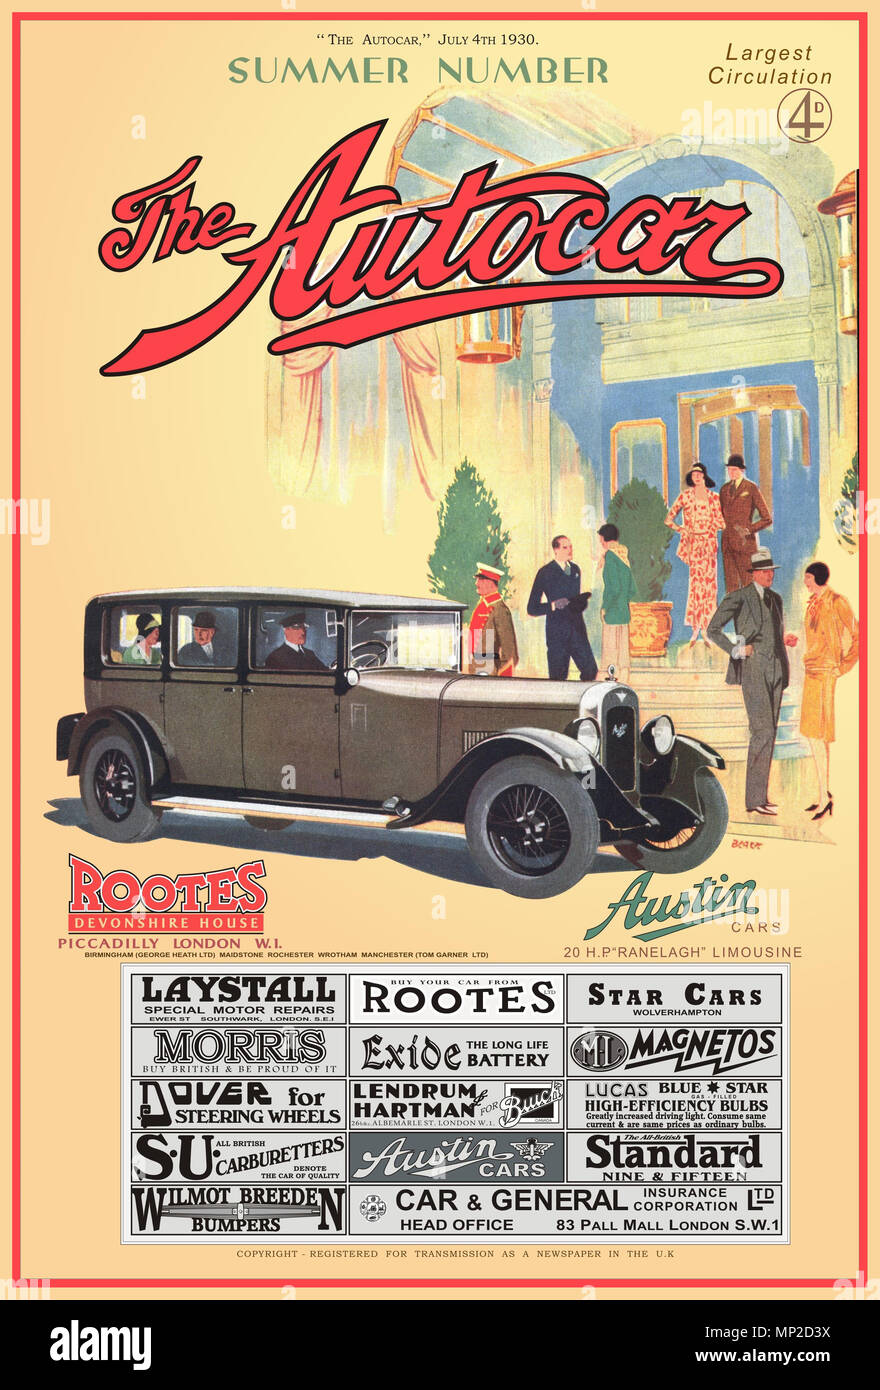 Vintage 1930 'The Autocar' magazine summer number featuring an Austin 20hp Ranelagh Limousine car with main sponsorship by Rootes Picadilly London Stock Photo